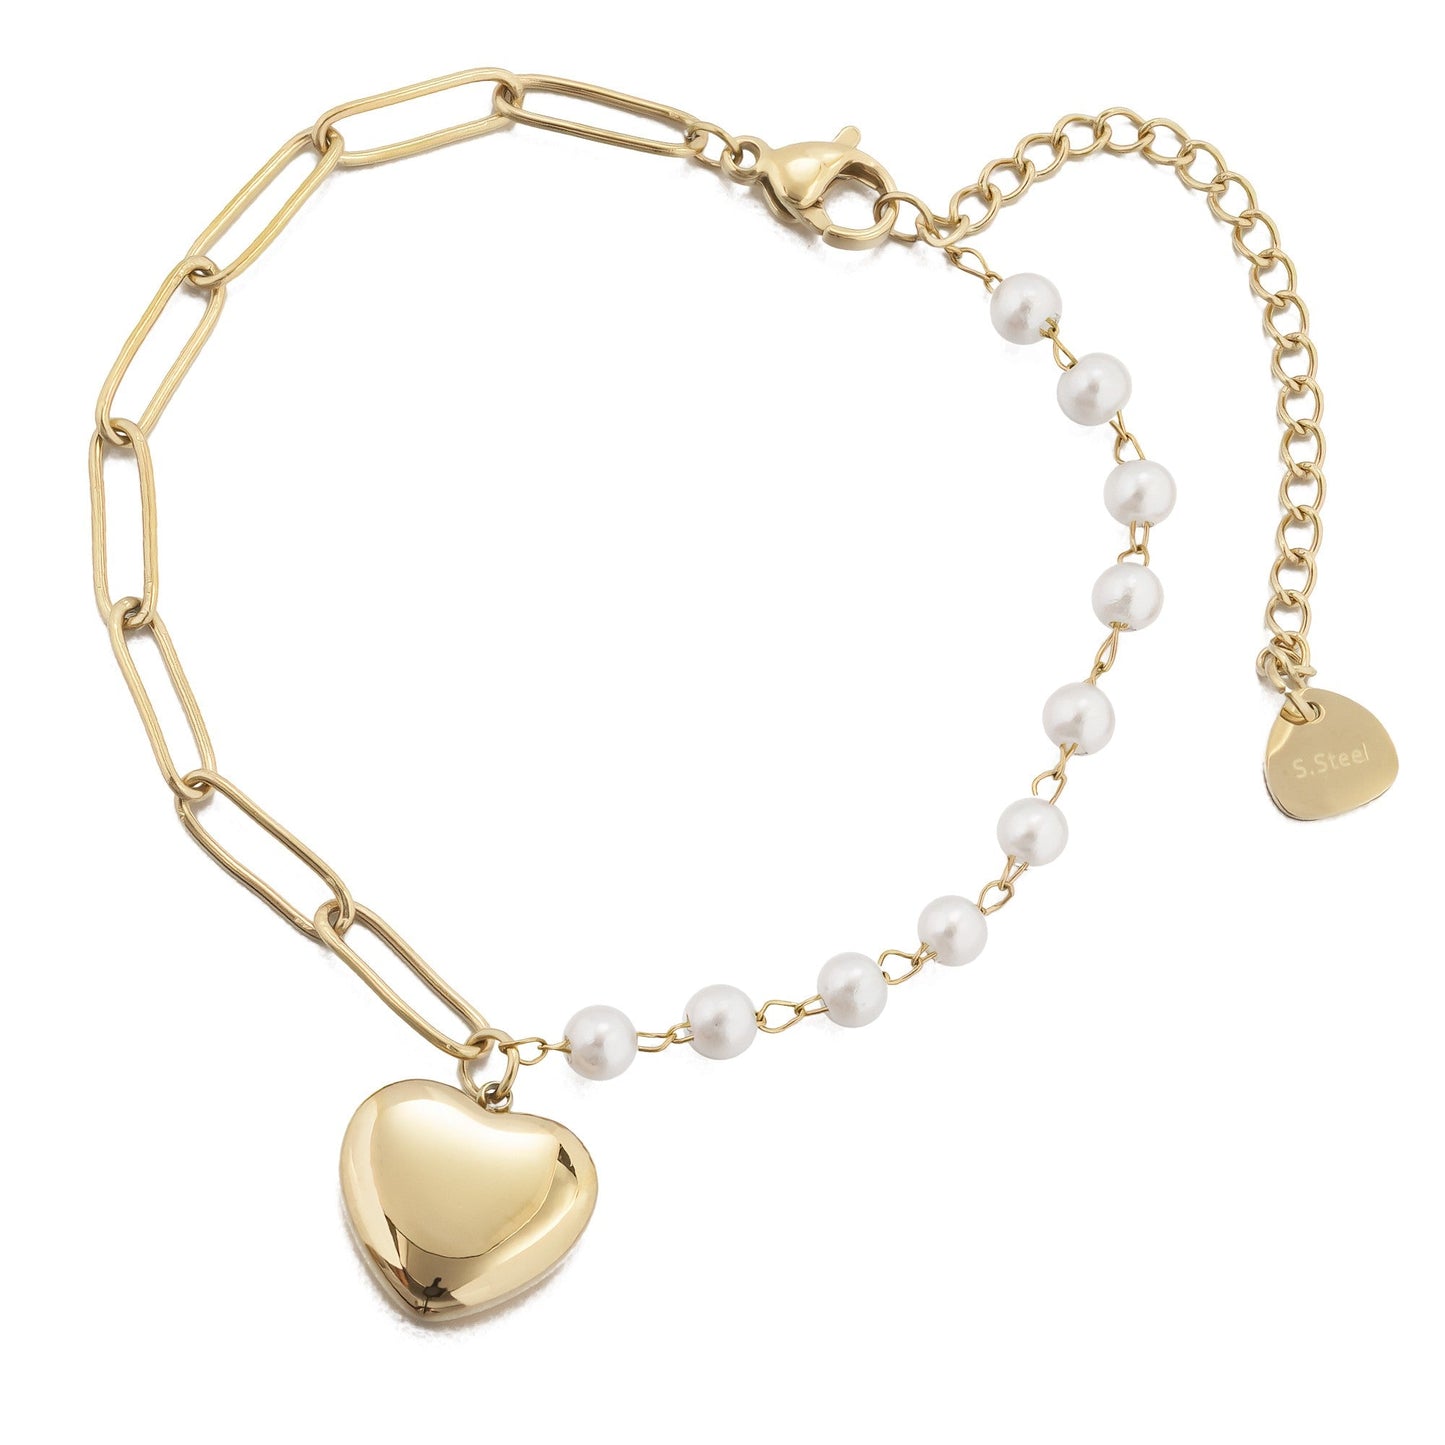 14k Gold Plated Pearl Bracelet with Heart Pendant